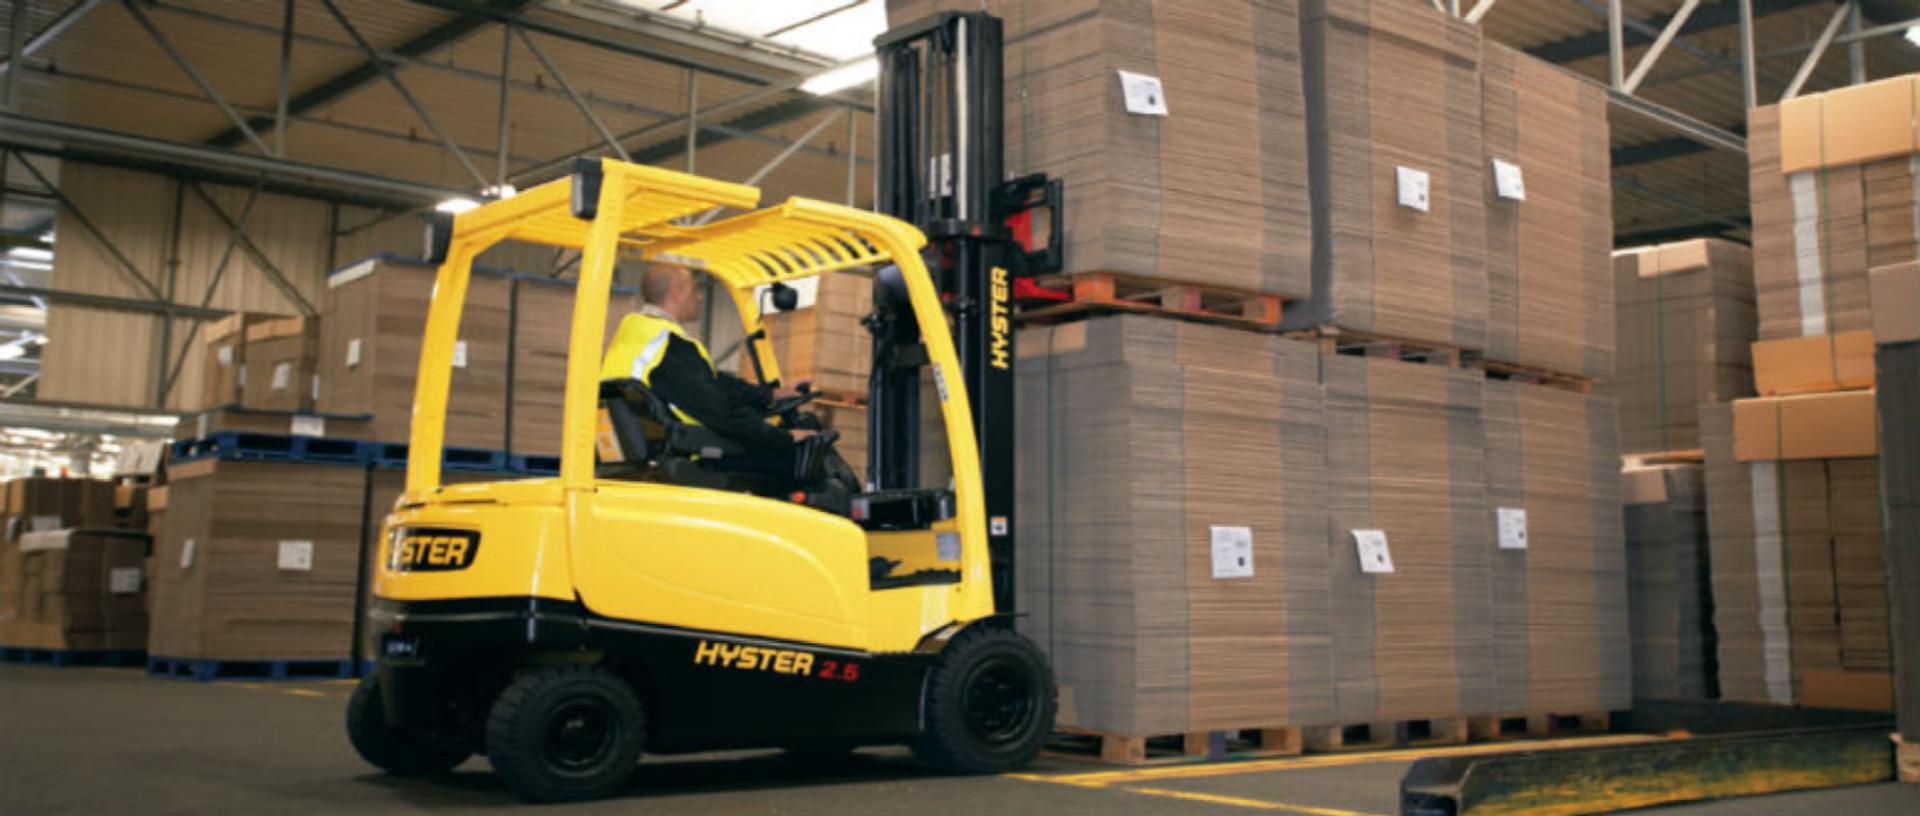 Hyster-Yale forklift